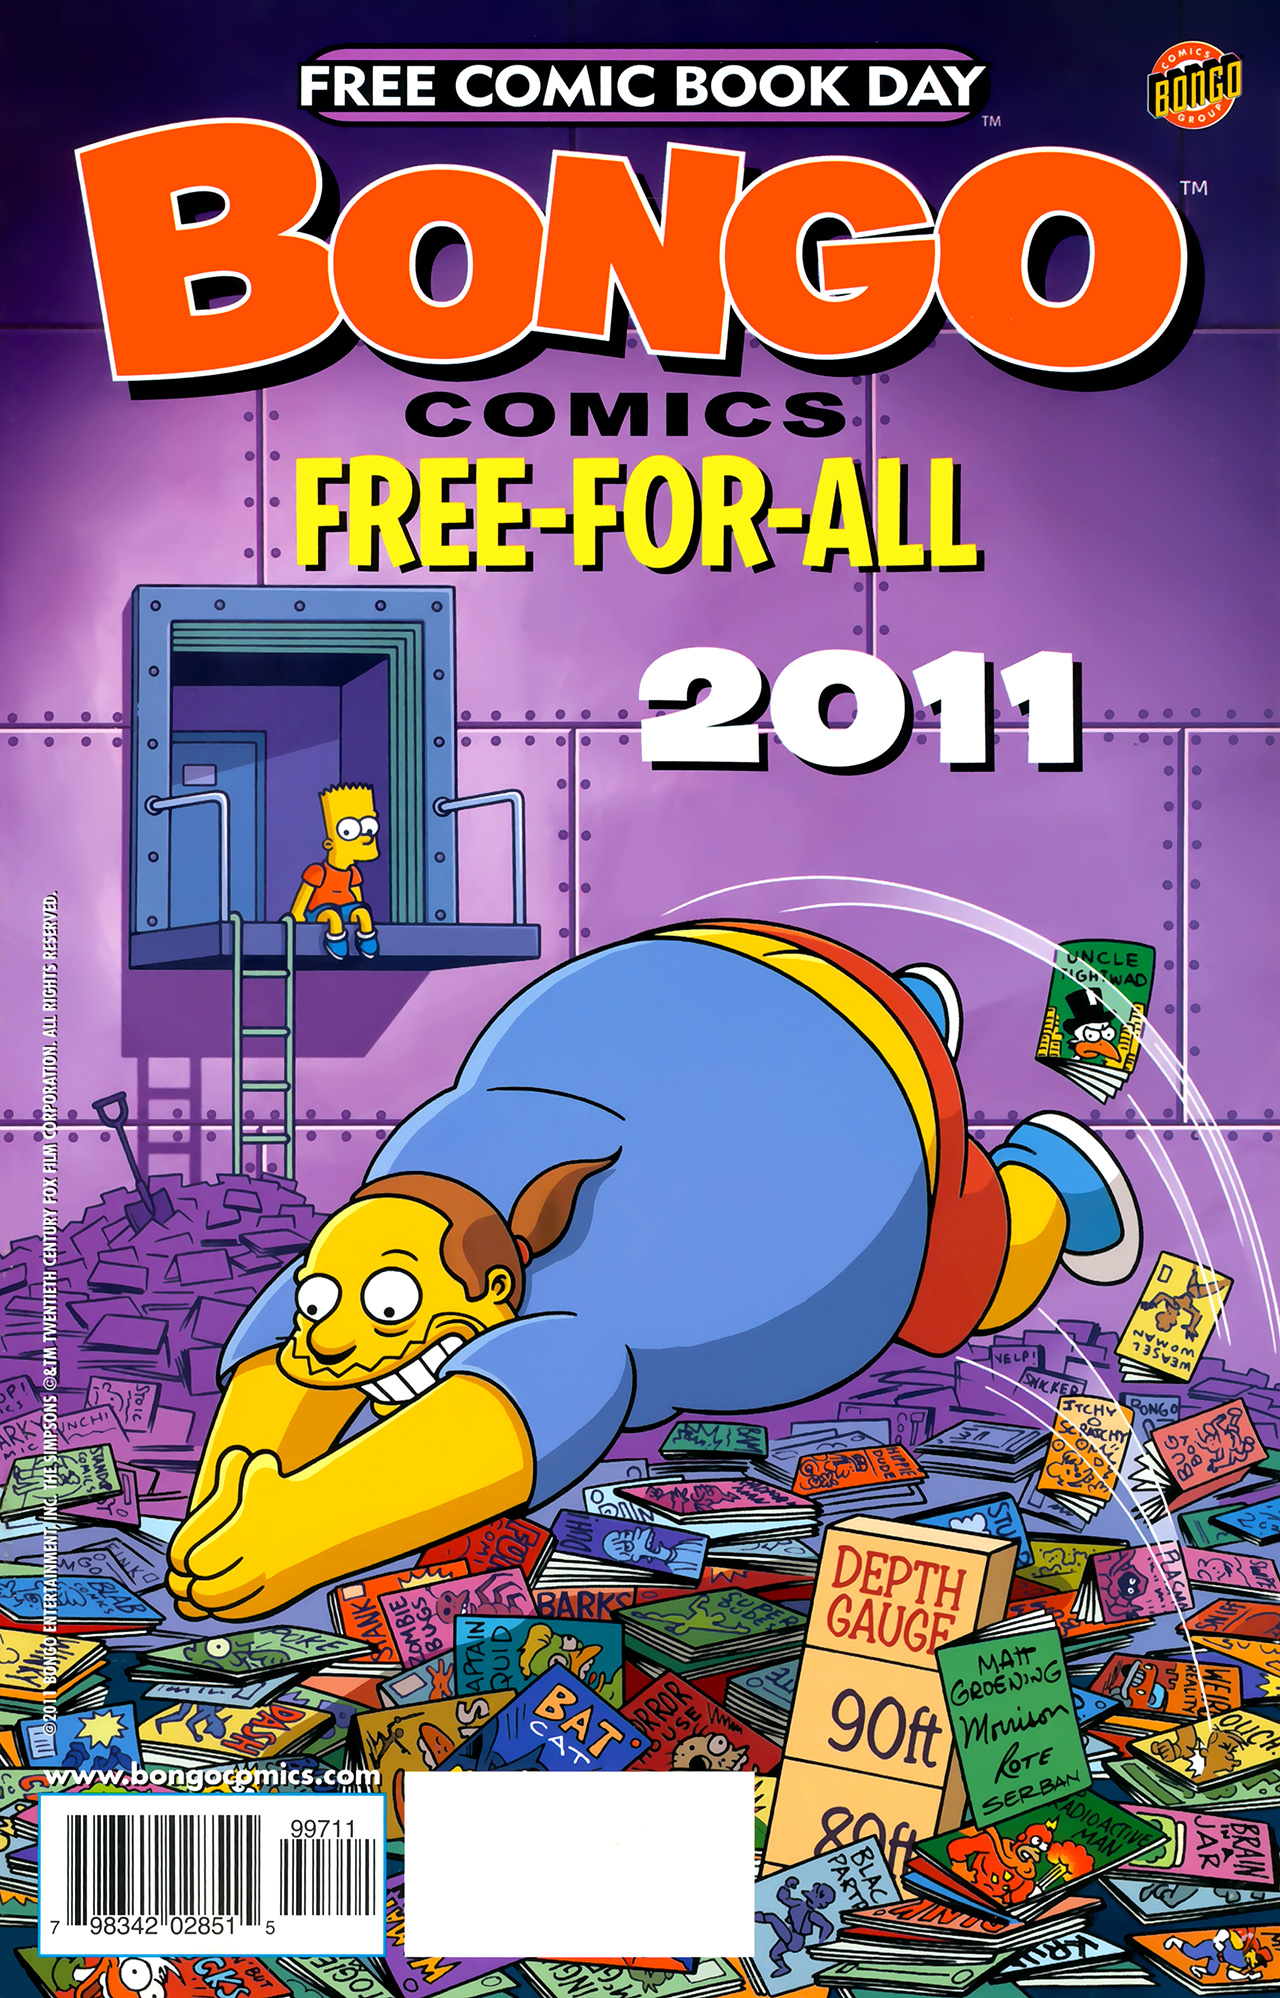 Read online Bongo Comics Free-For-All! comic -  Issue #2011 - 1